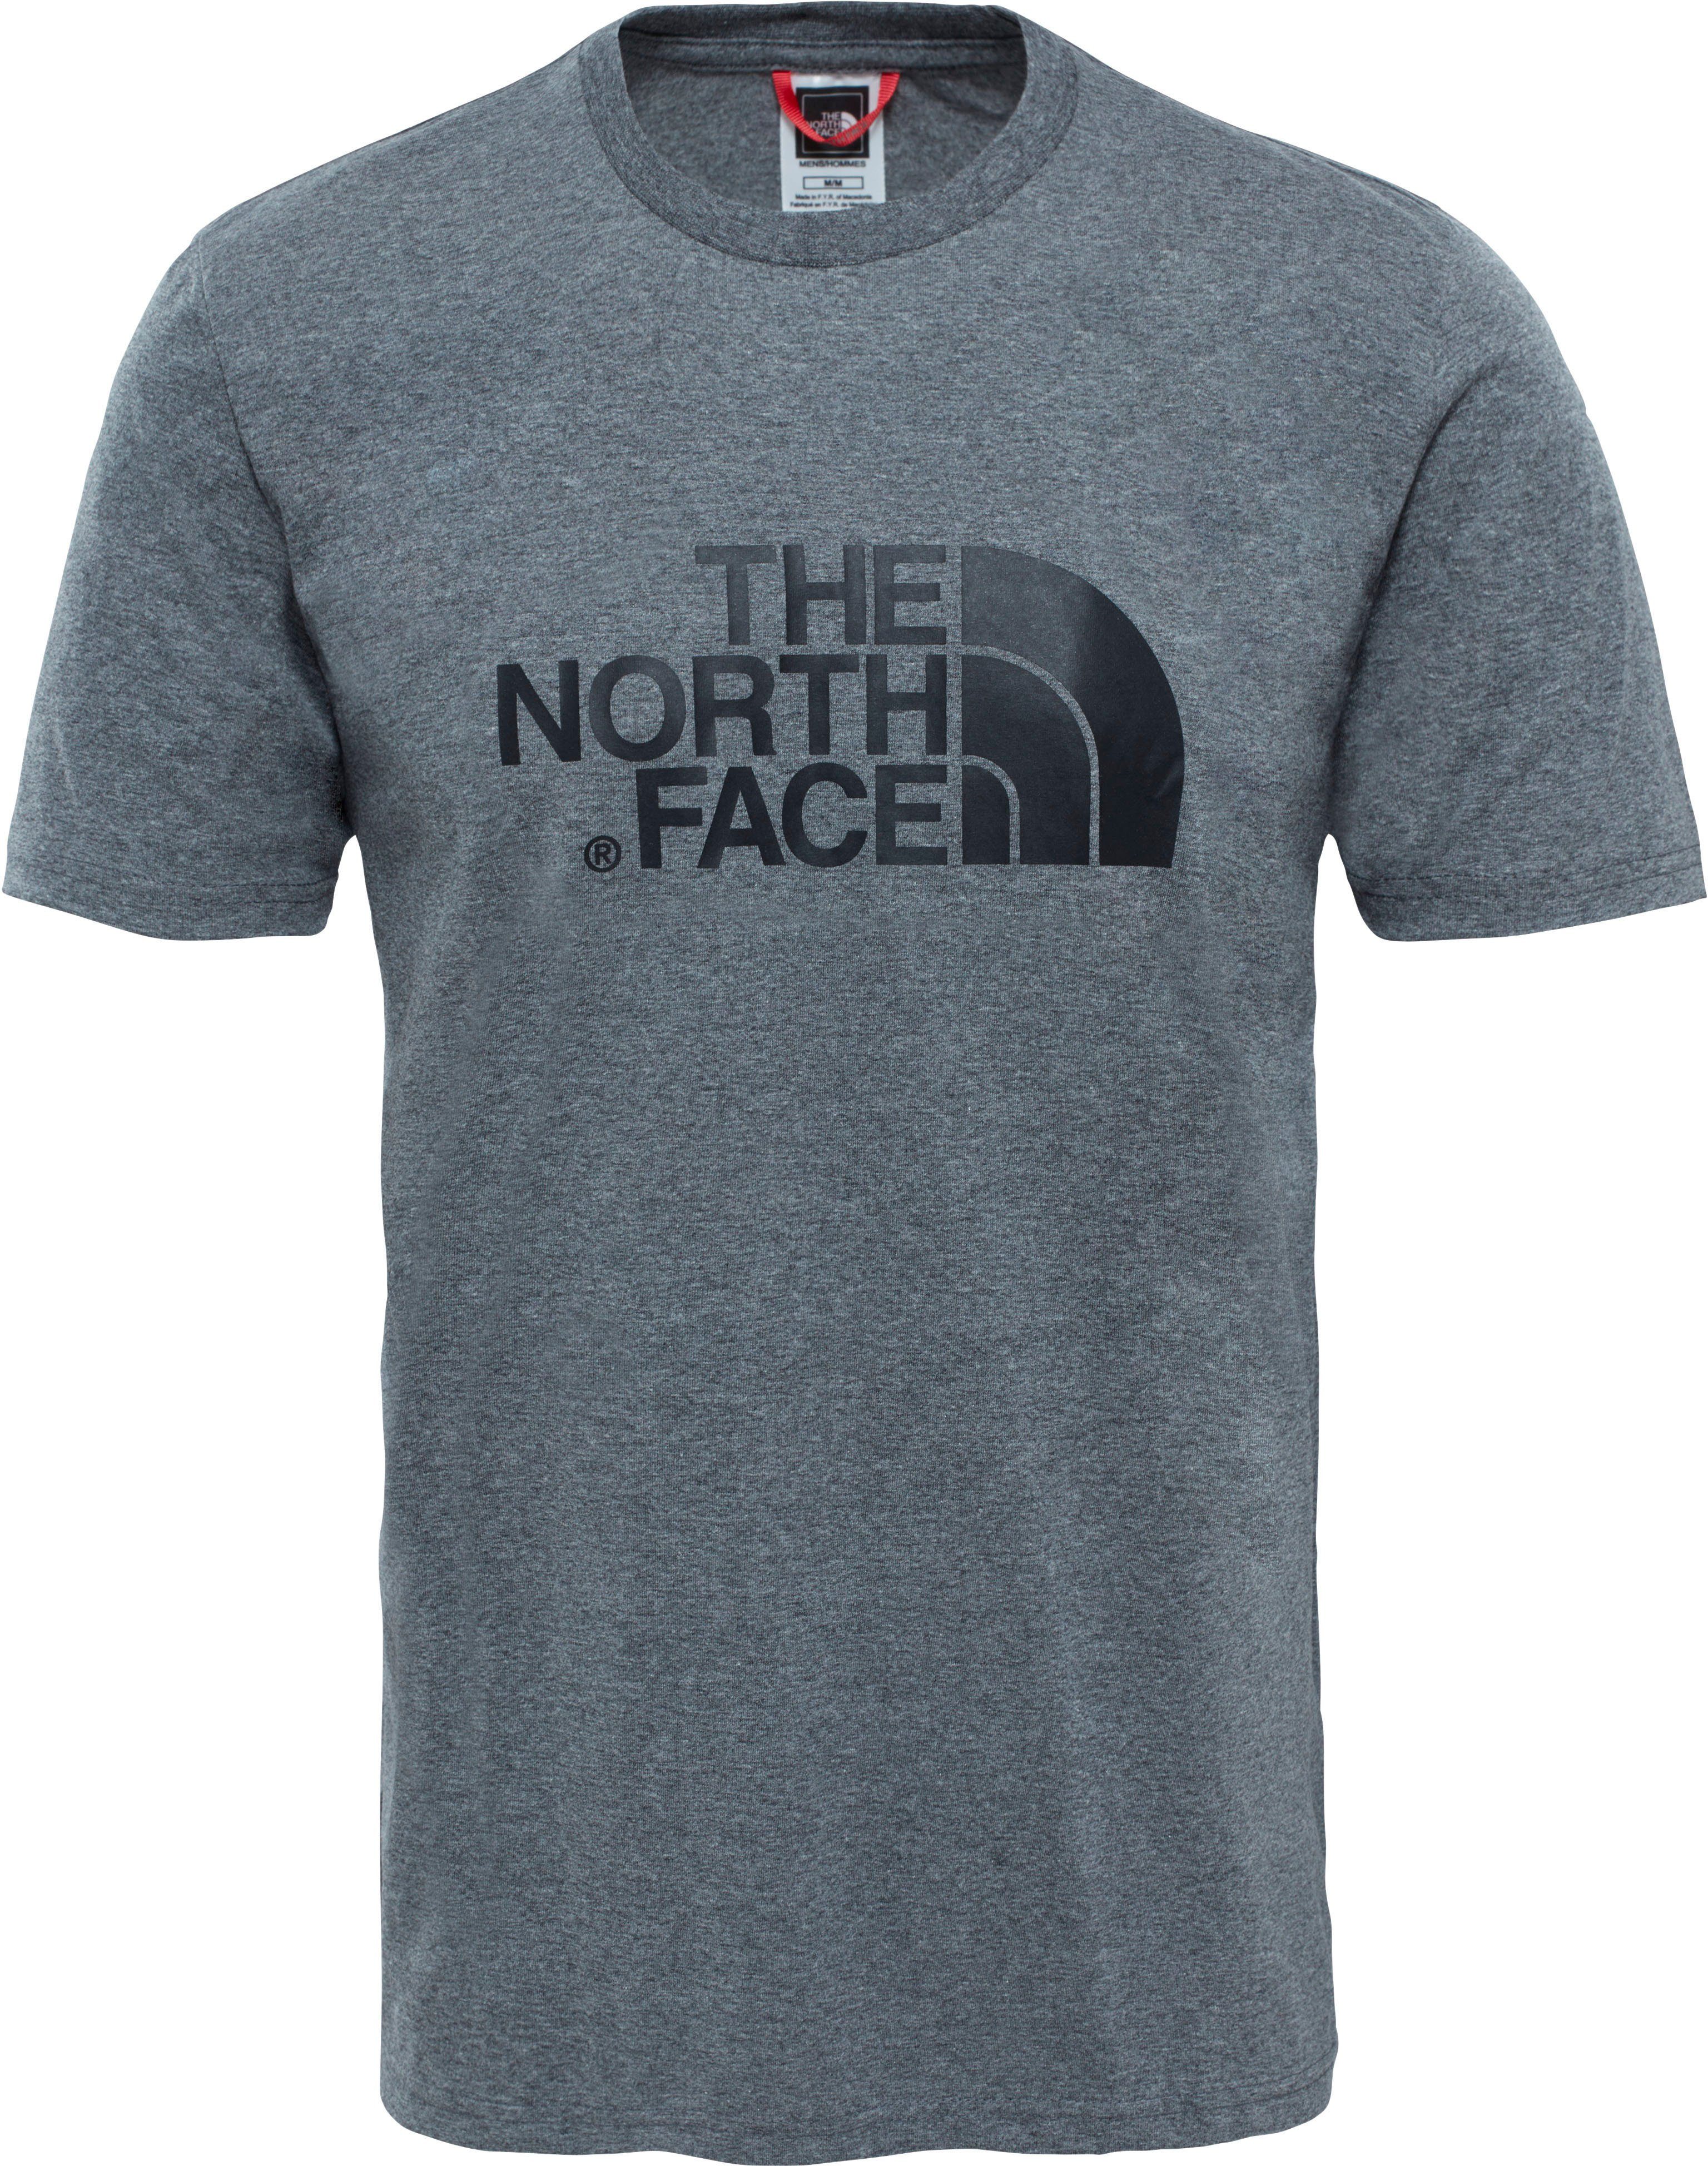 The North Face T-Shirt »EASY TEE« Großer Logo-Print online kaufen | OTTO